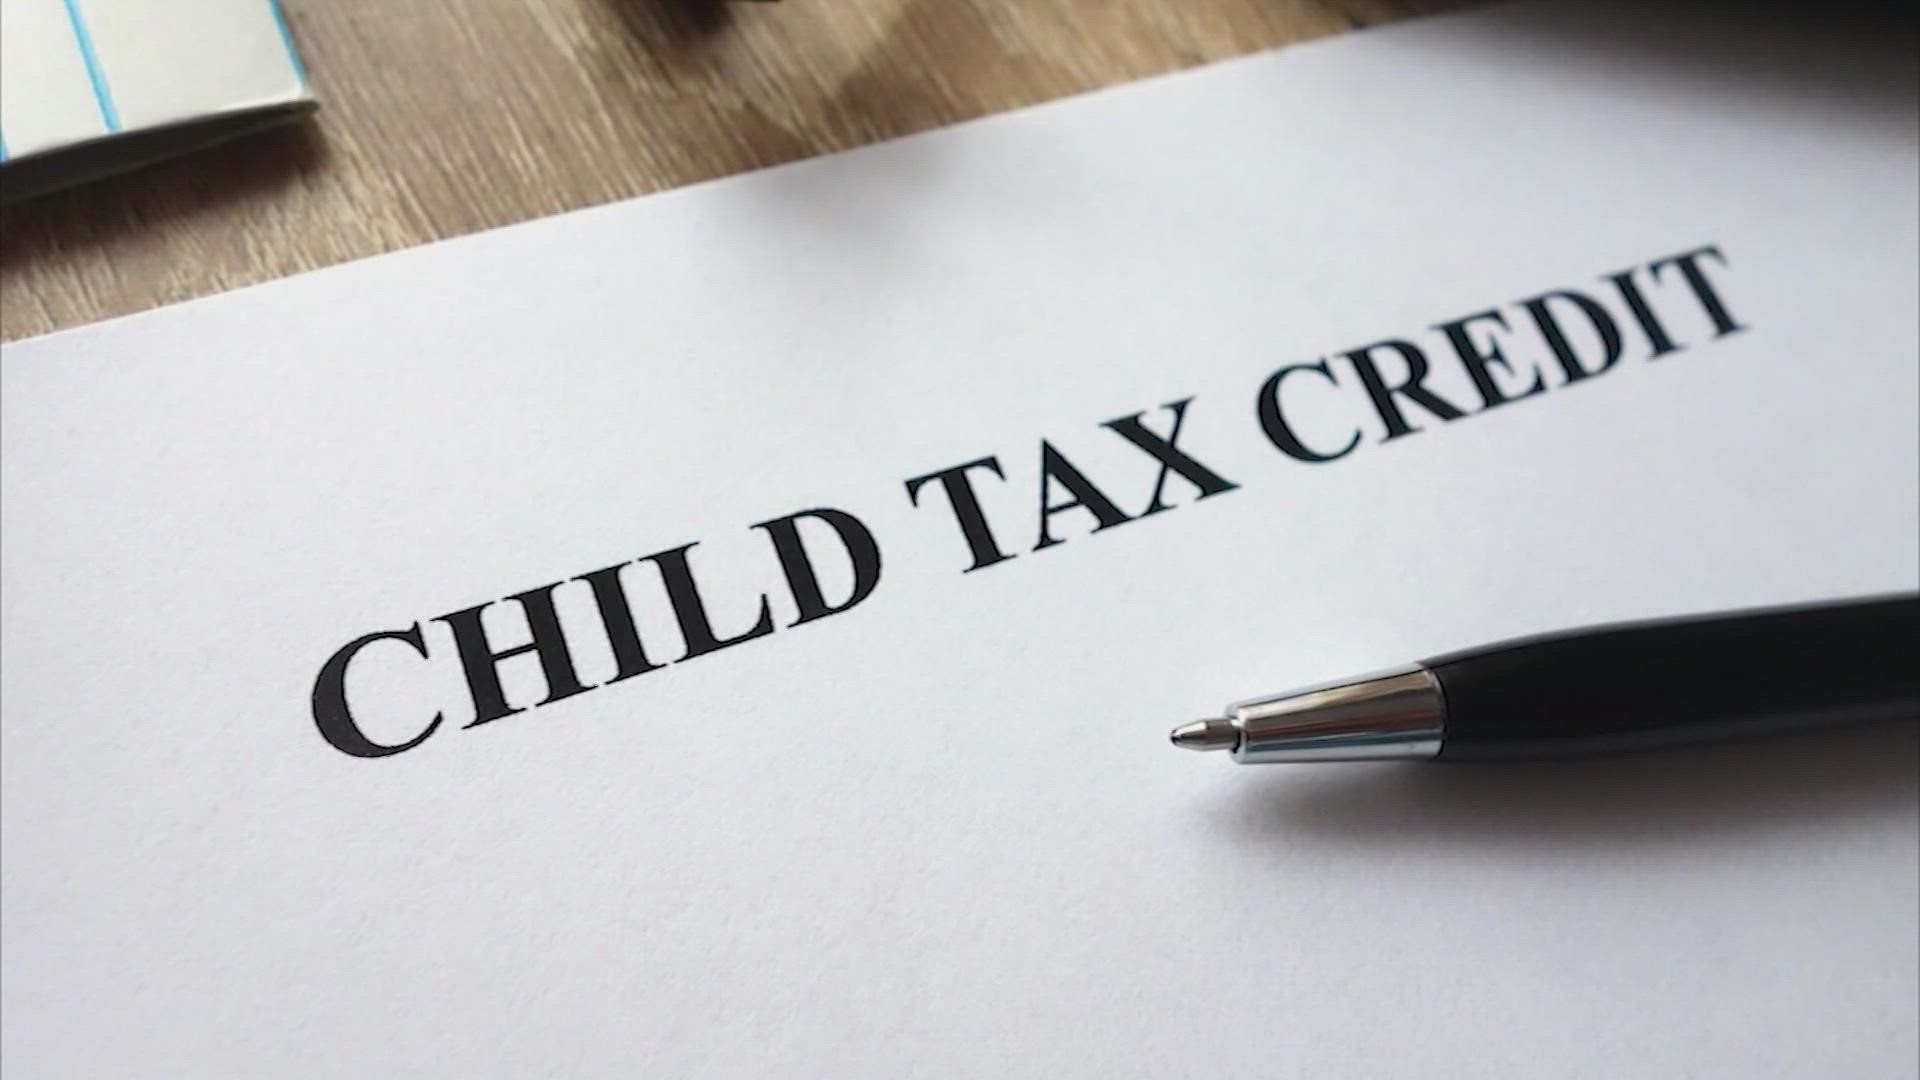 Many low-income families eligible for the monthly child tax credit payments haven't signed up to receive them. They have just hours left to register.